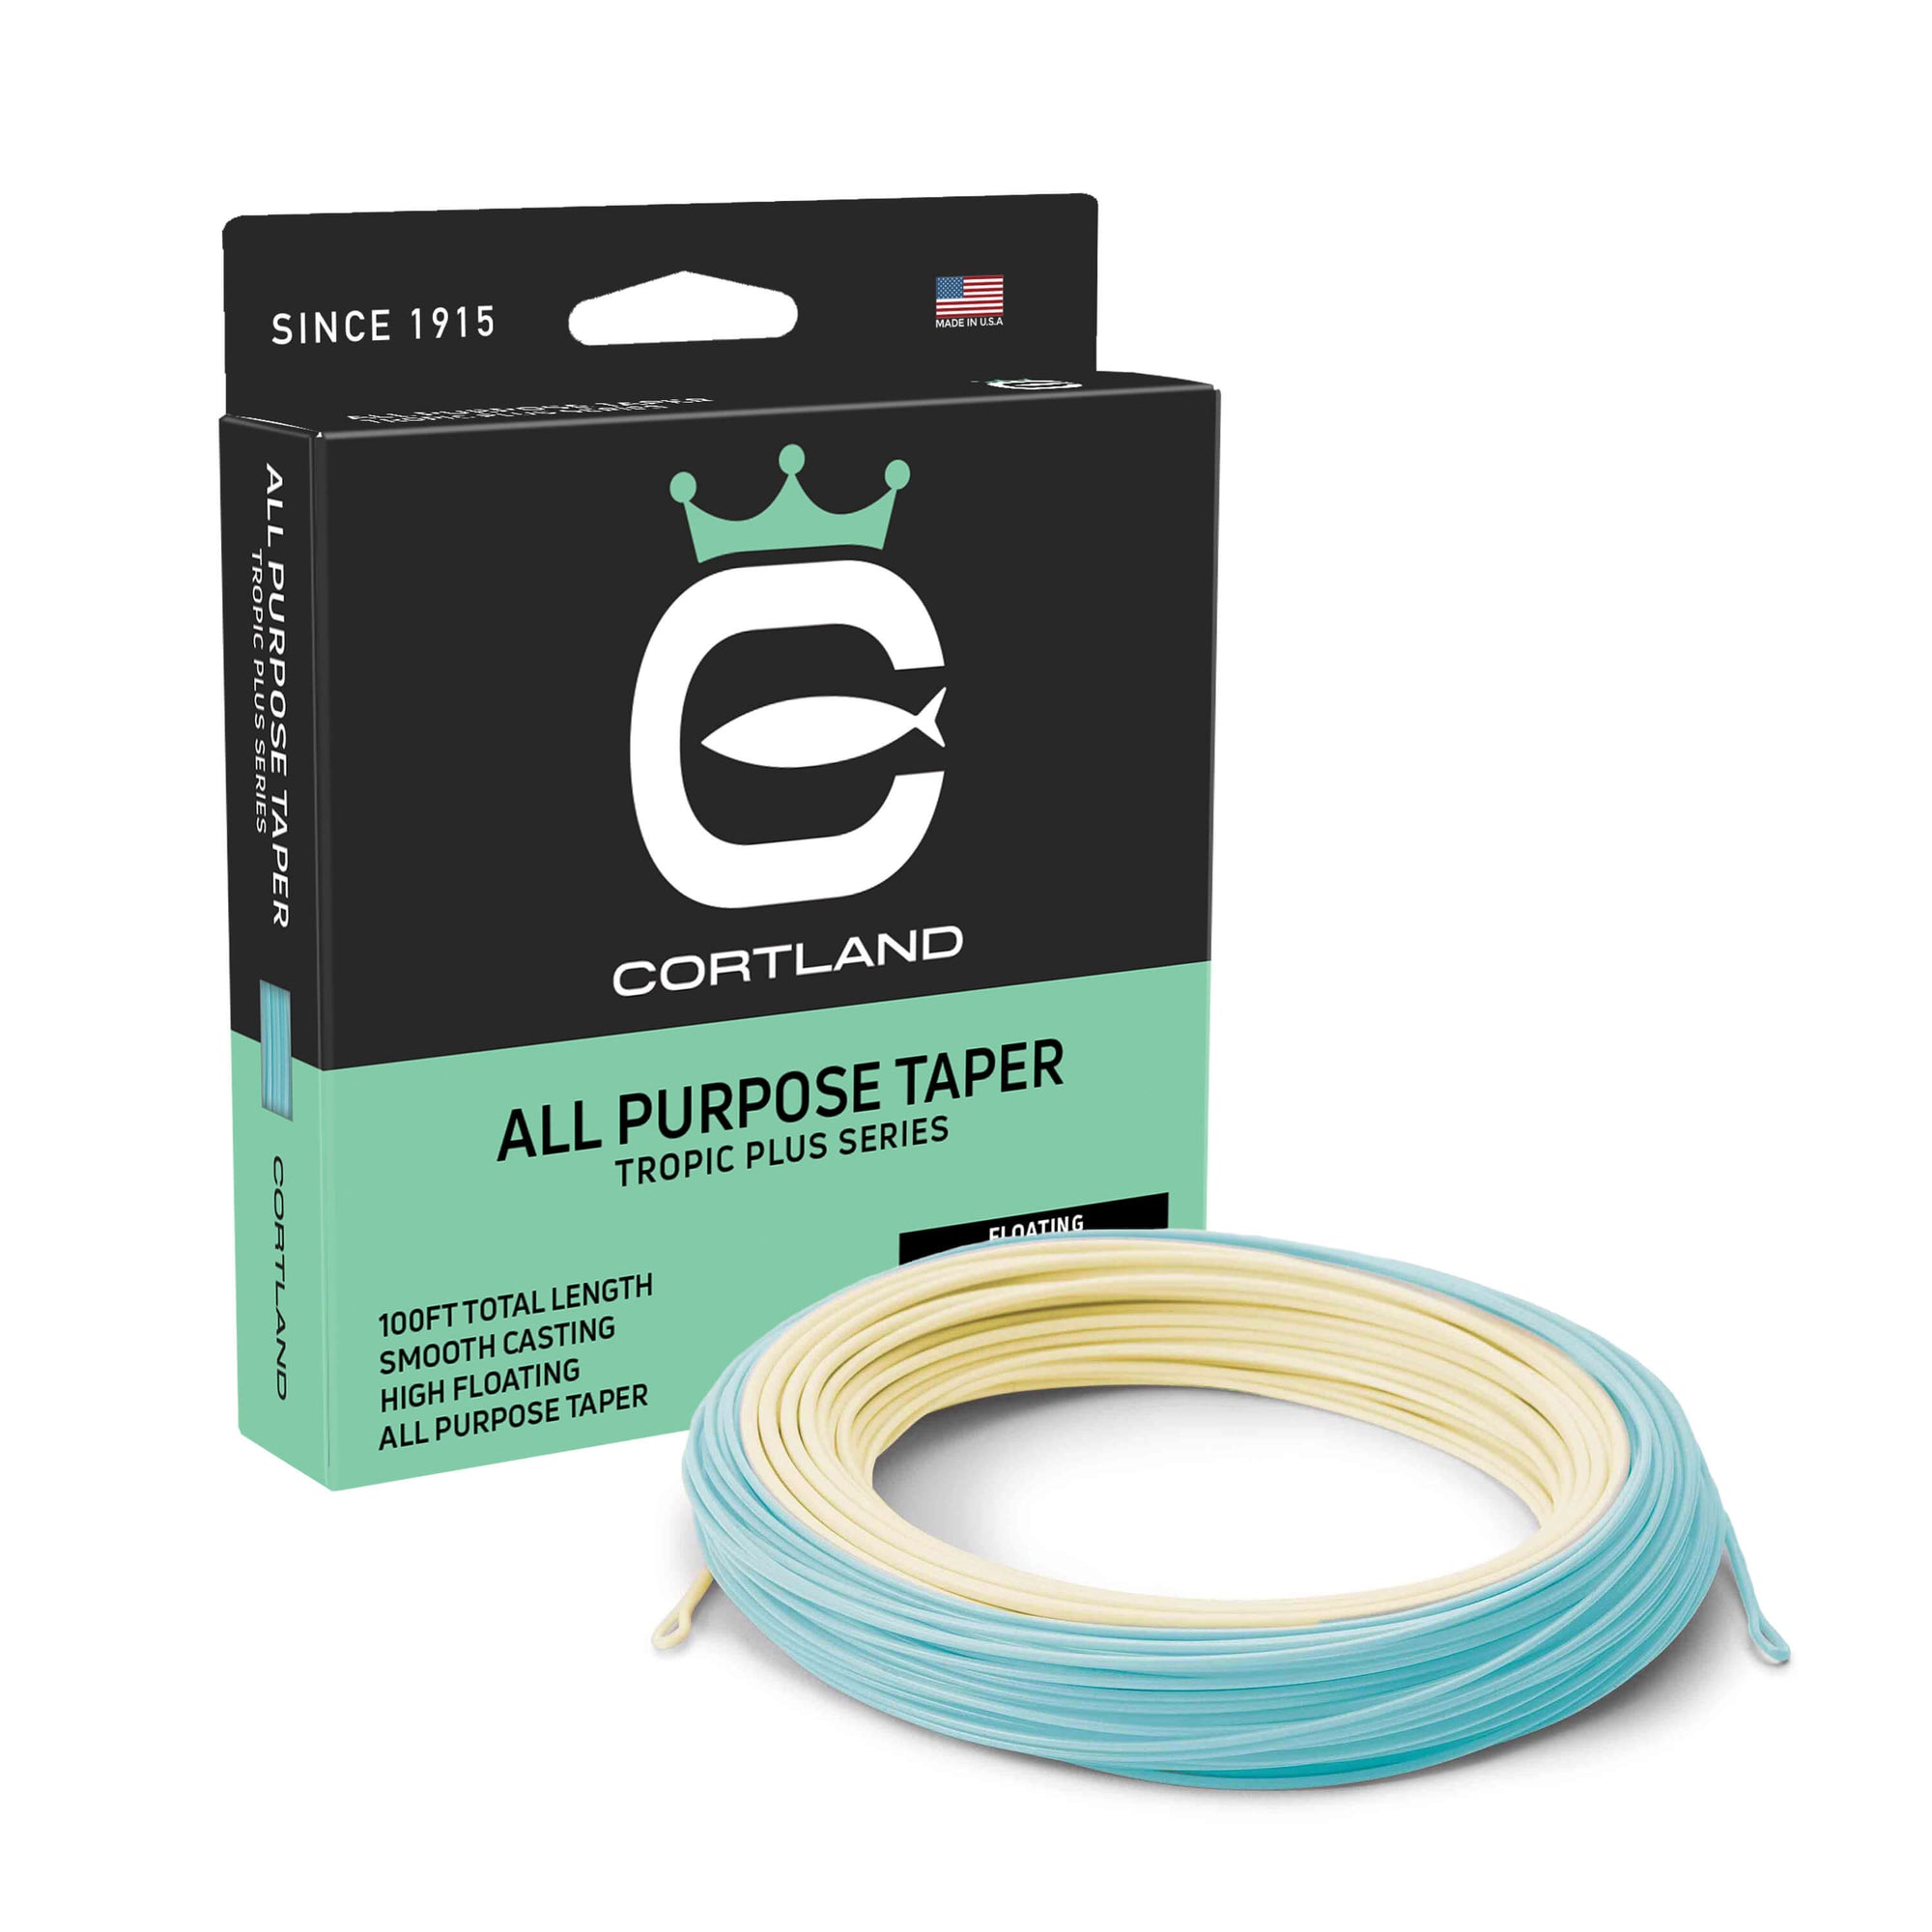 All Purpose Taper Fly Line and Box. The coil is sand and blue. The top of the box is black and the bottom is light blue. The Cortland logo is in the center.